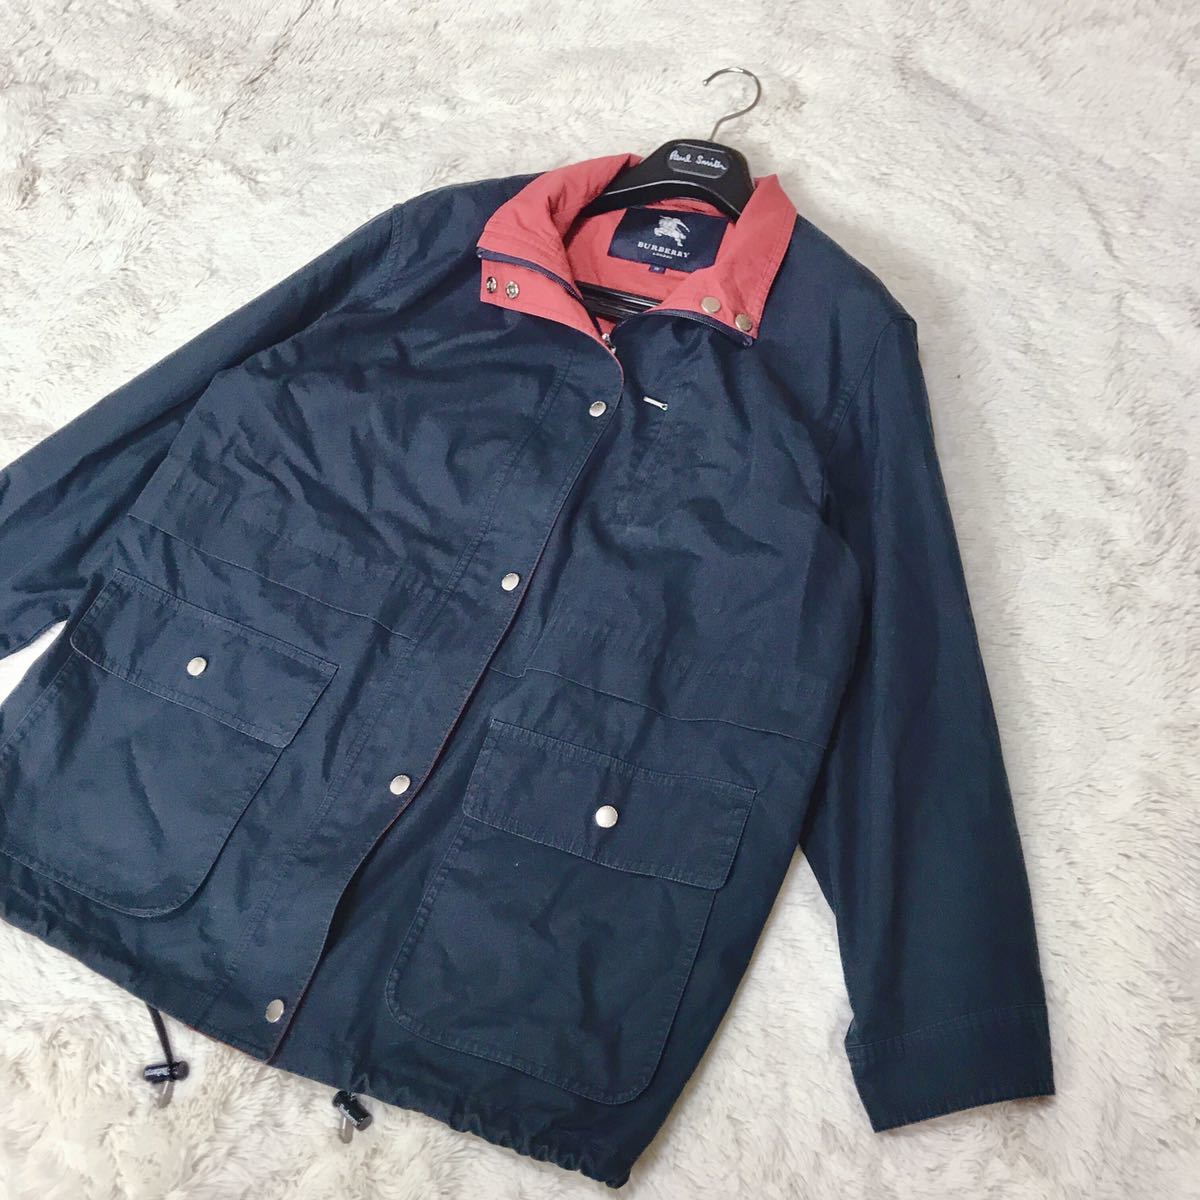  large size beautiful goods BURBERRY swing top blouson jacket Burberry XL size brand Logo silver button navy red 